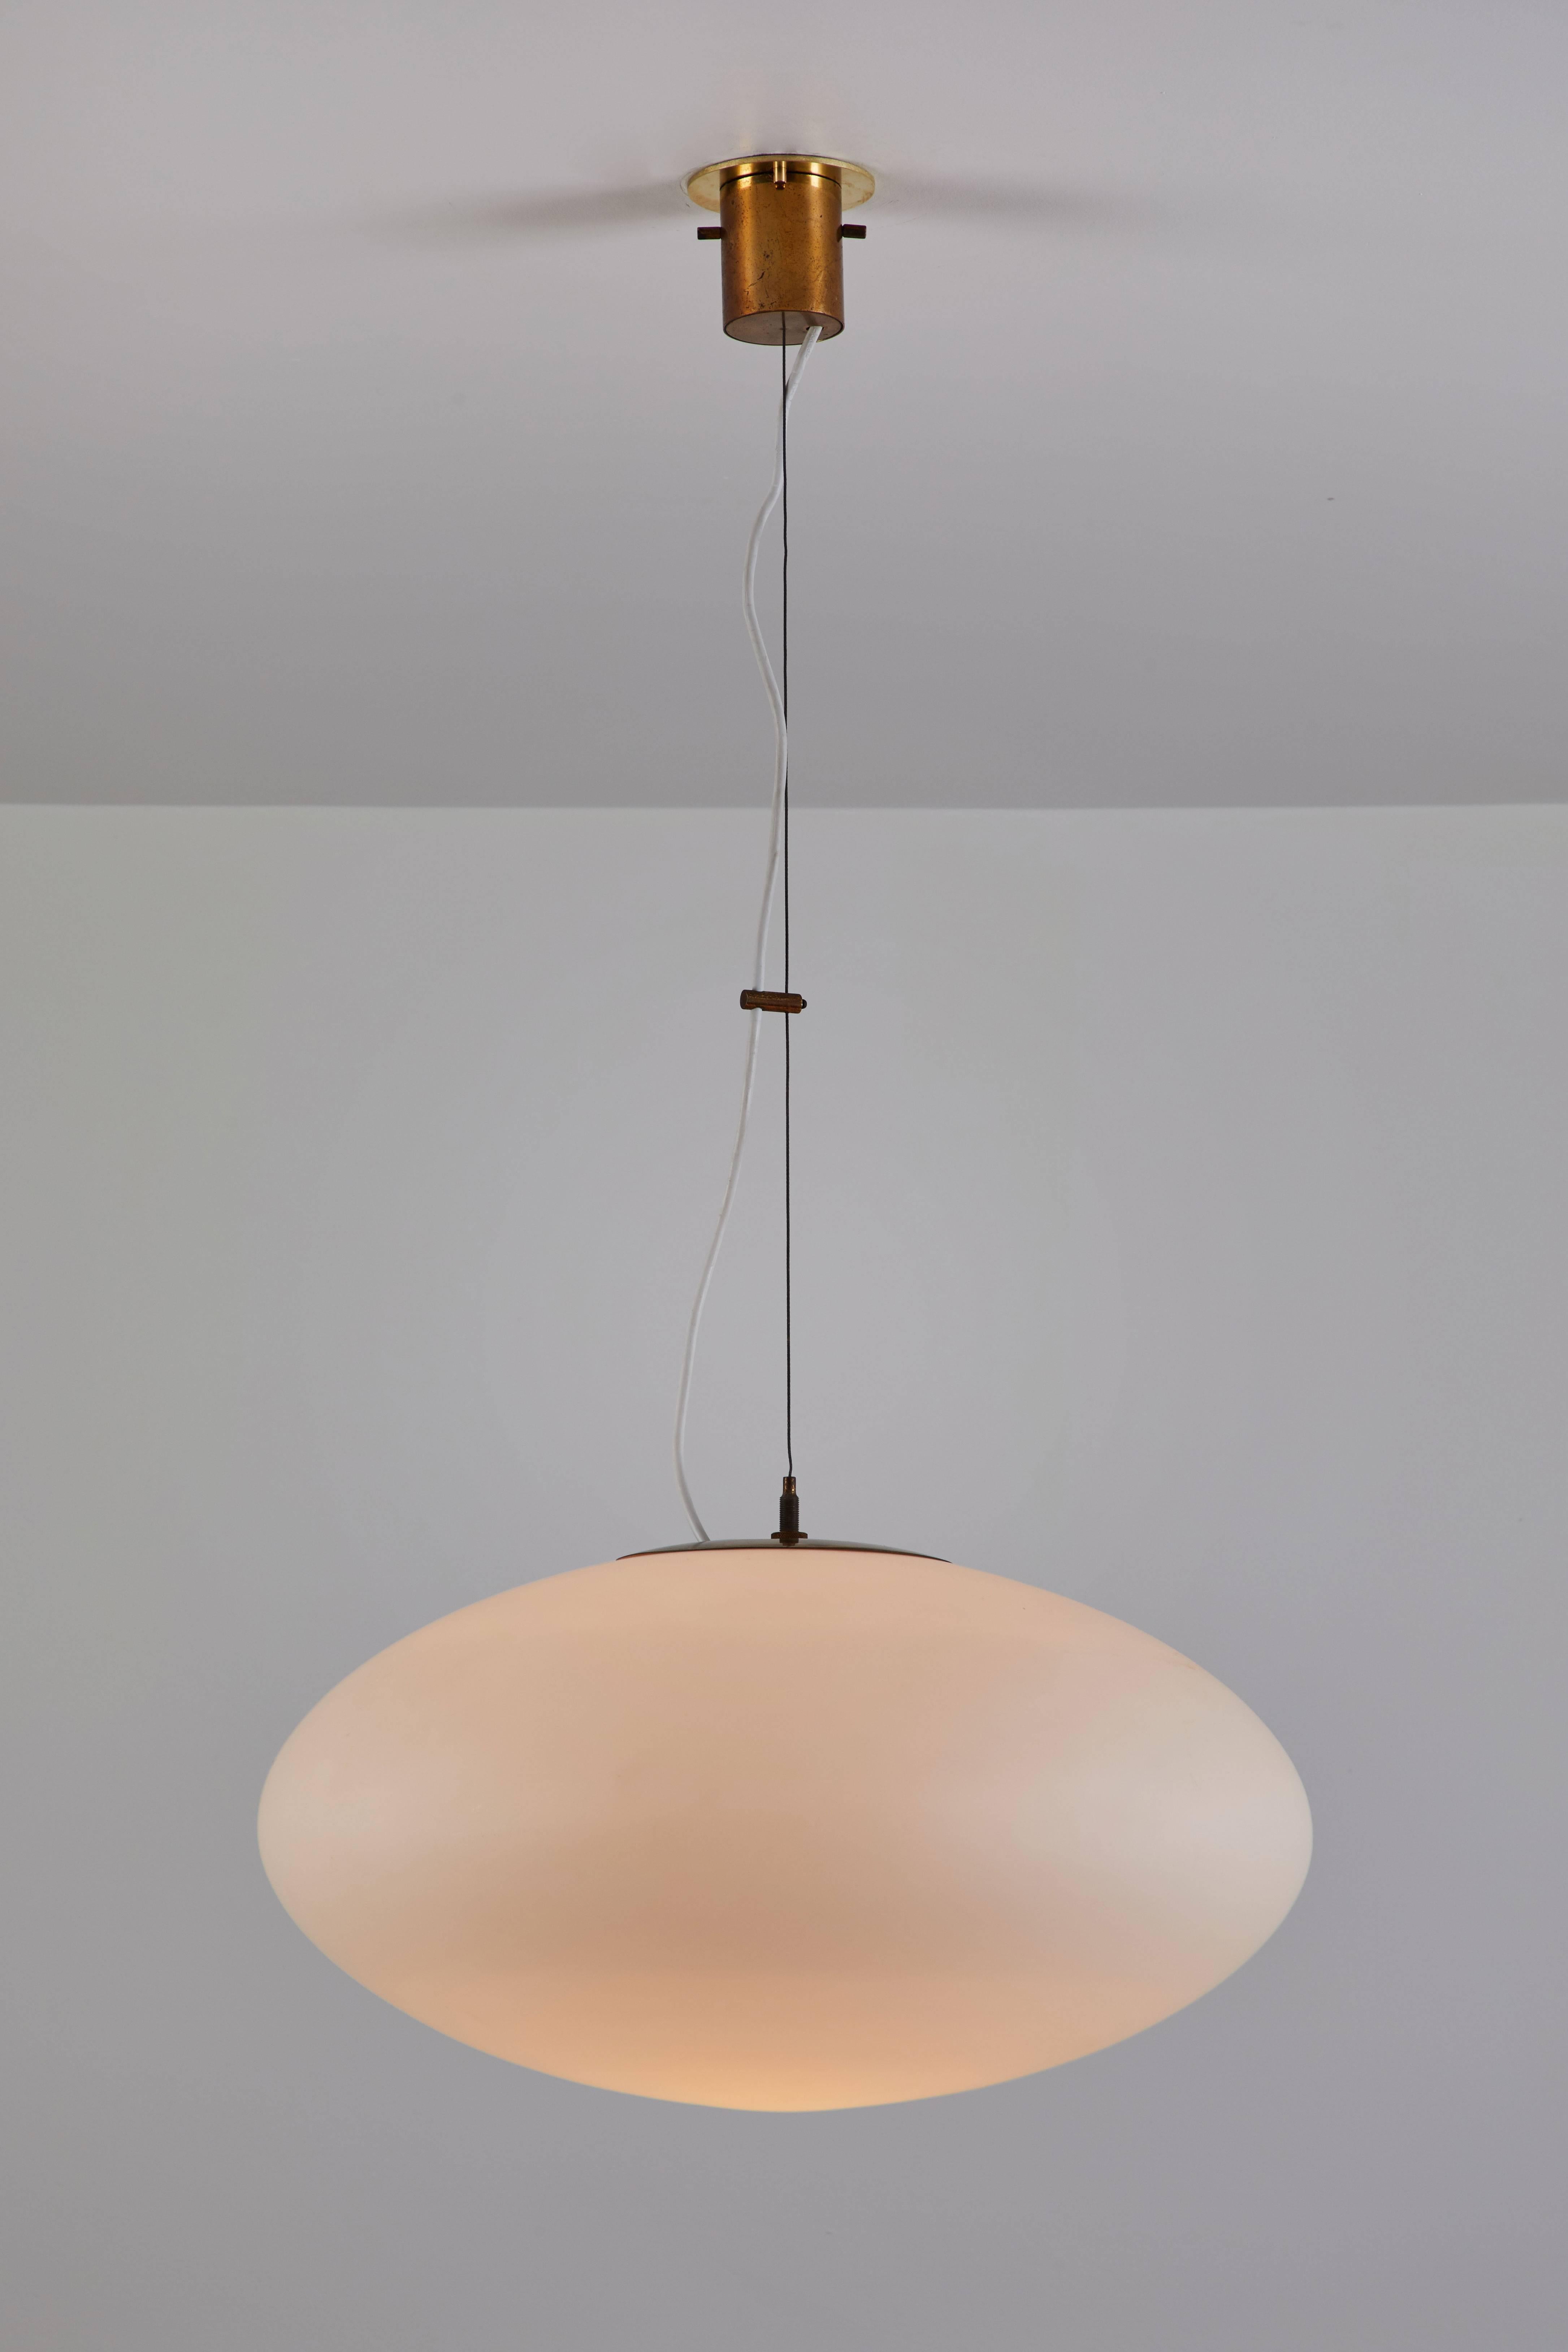 Suspension Light by Stilnovo manufactured in Italy, circa 1950s. Brushed satin glass with brass hardware. Custom brass backplates. Rewired for US junction boxes. Overall drop can be customized. Takes one E27 100w maximum bulb.